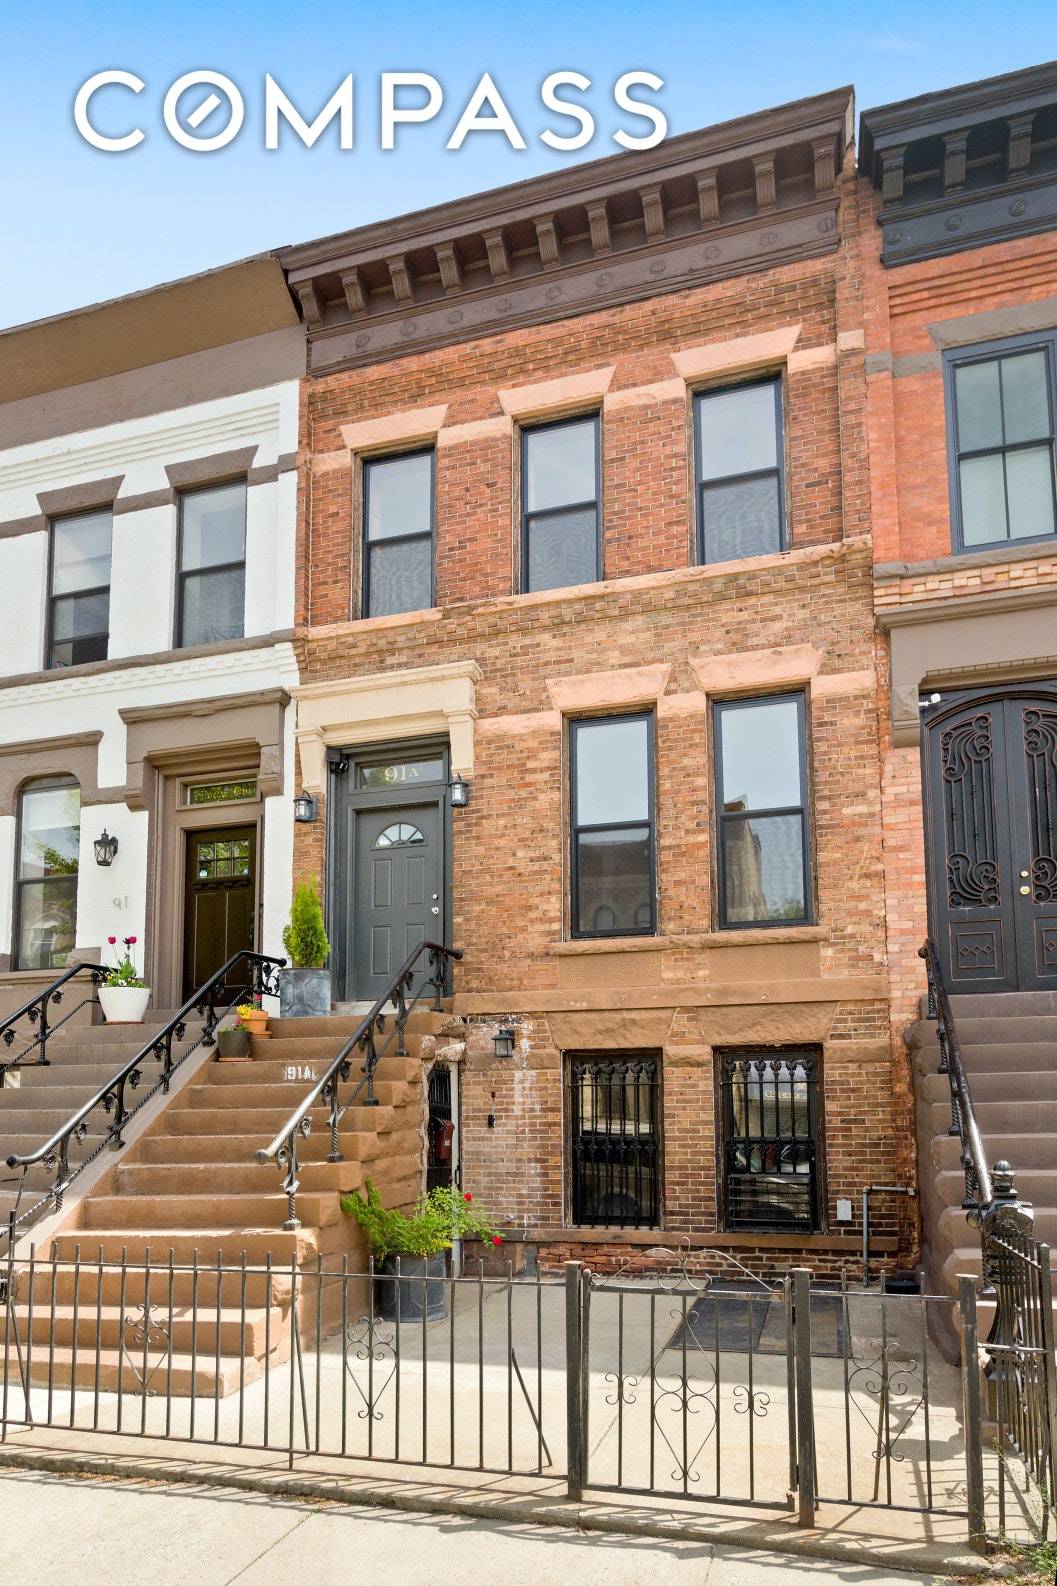 91A Saratoga is a lovingly restored and renovated 2 family townhouse in Bedford Stuyvesant.